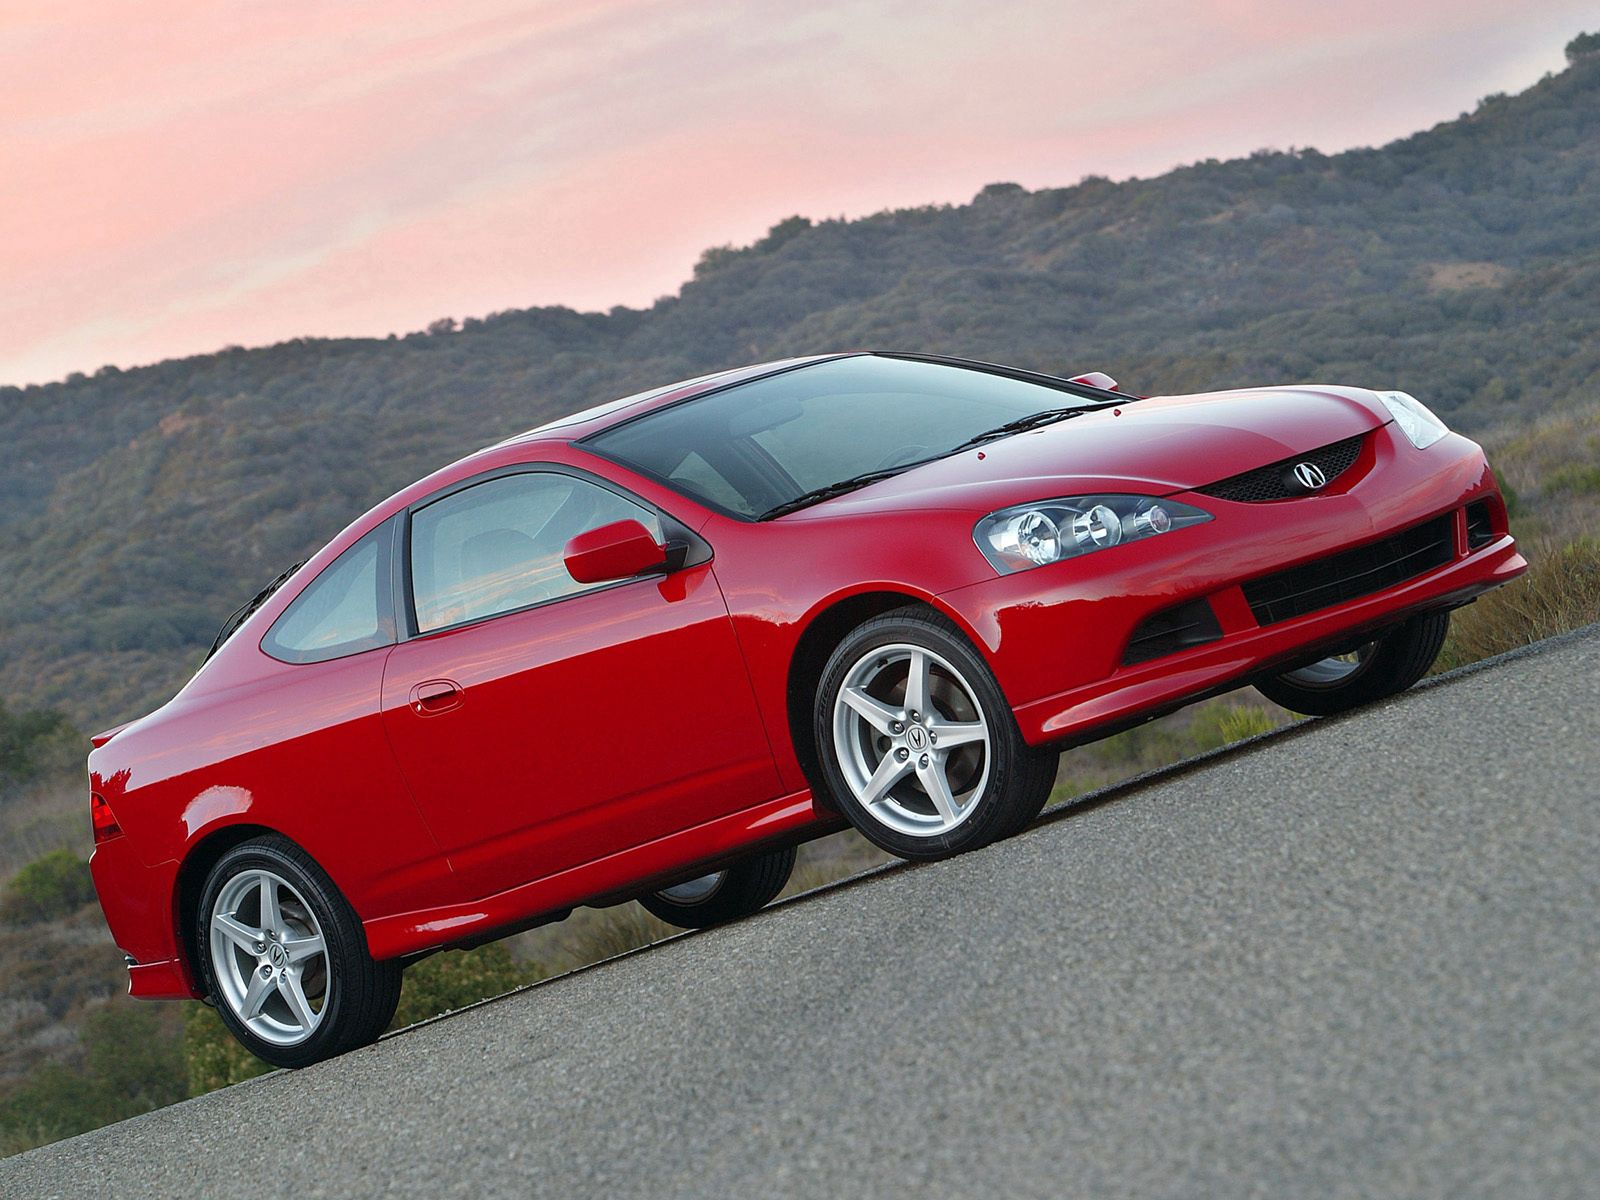 red, auto, nature, mountains, acura, cars, asphalt, side view, style, rsx, 2006 phone wallpaper